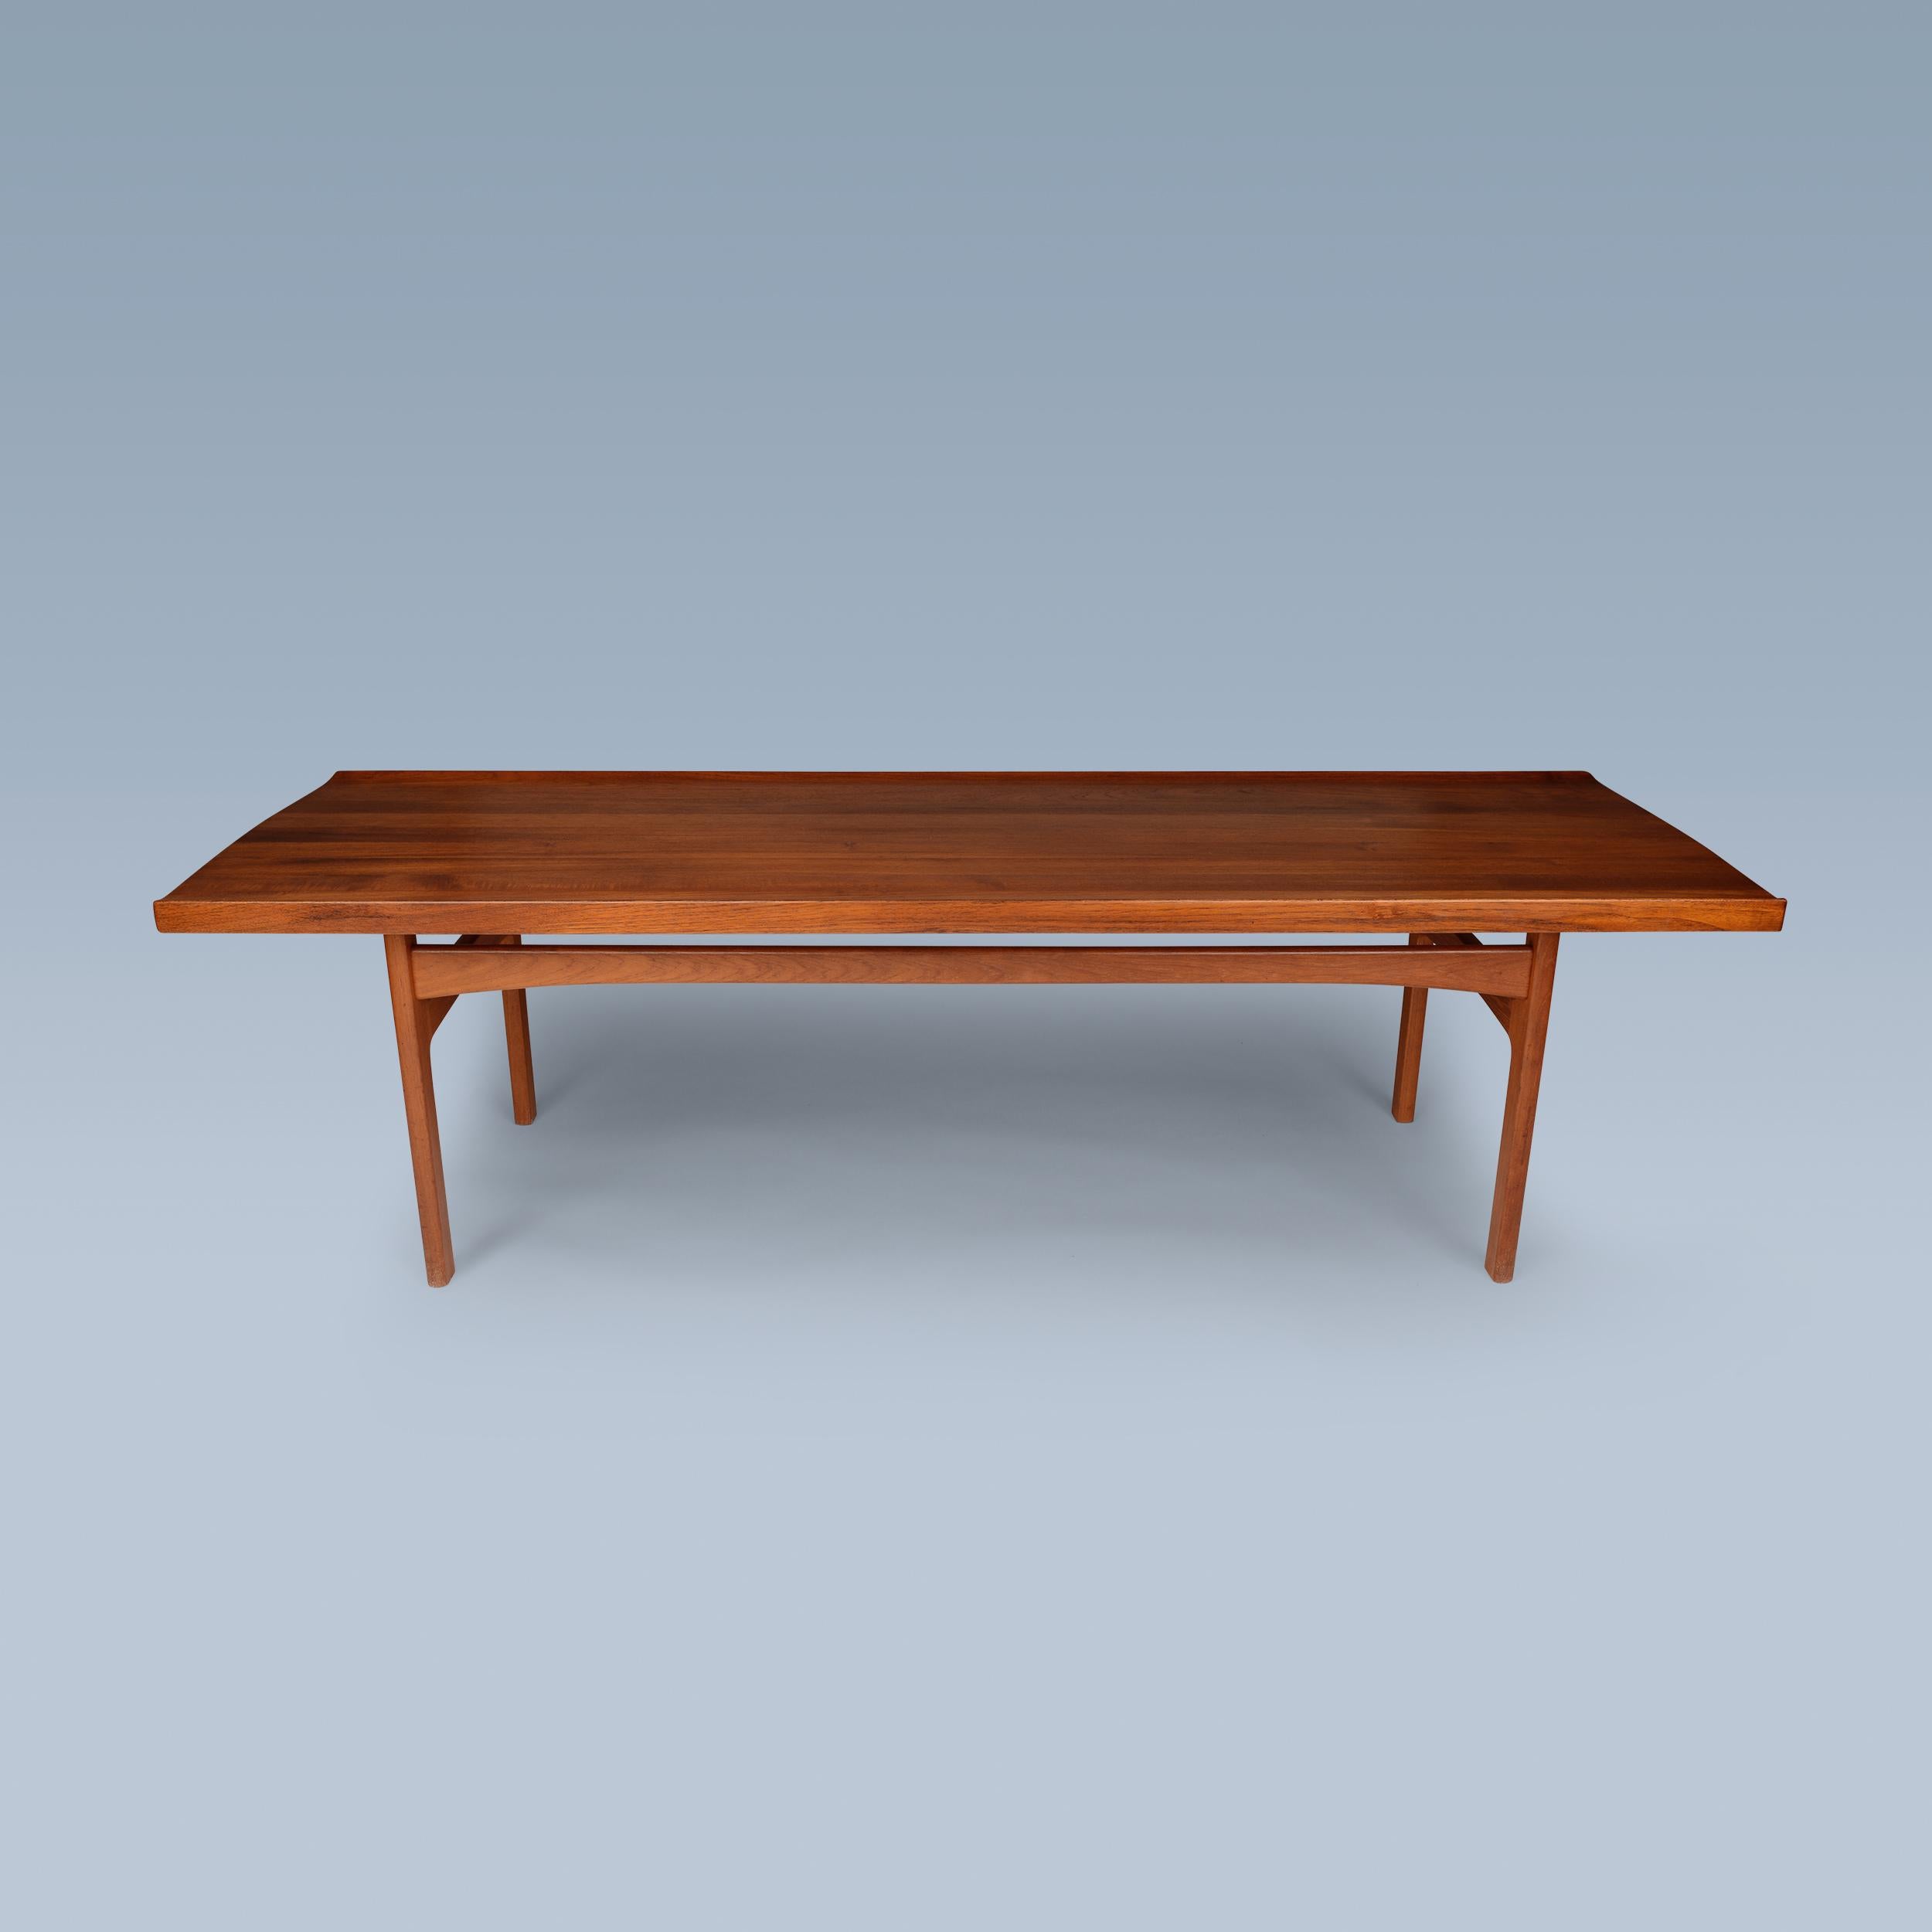 Birch Danish modern larger teak coffee table with contrasting birch details For Sale